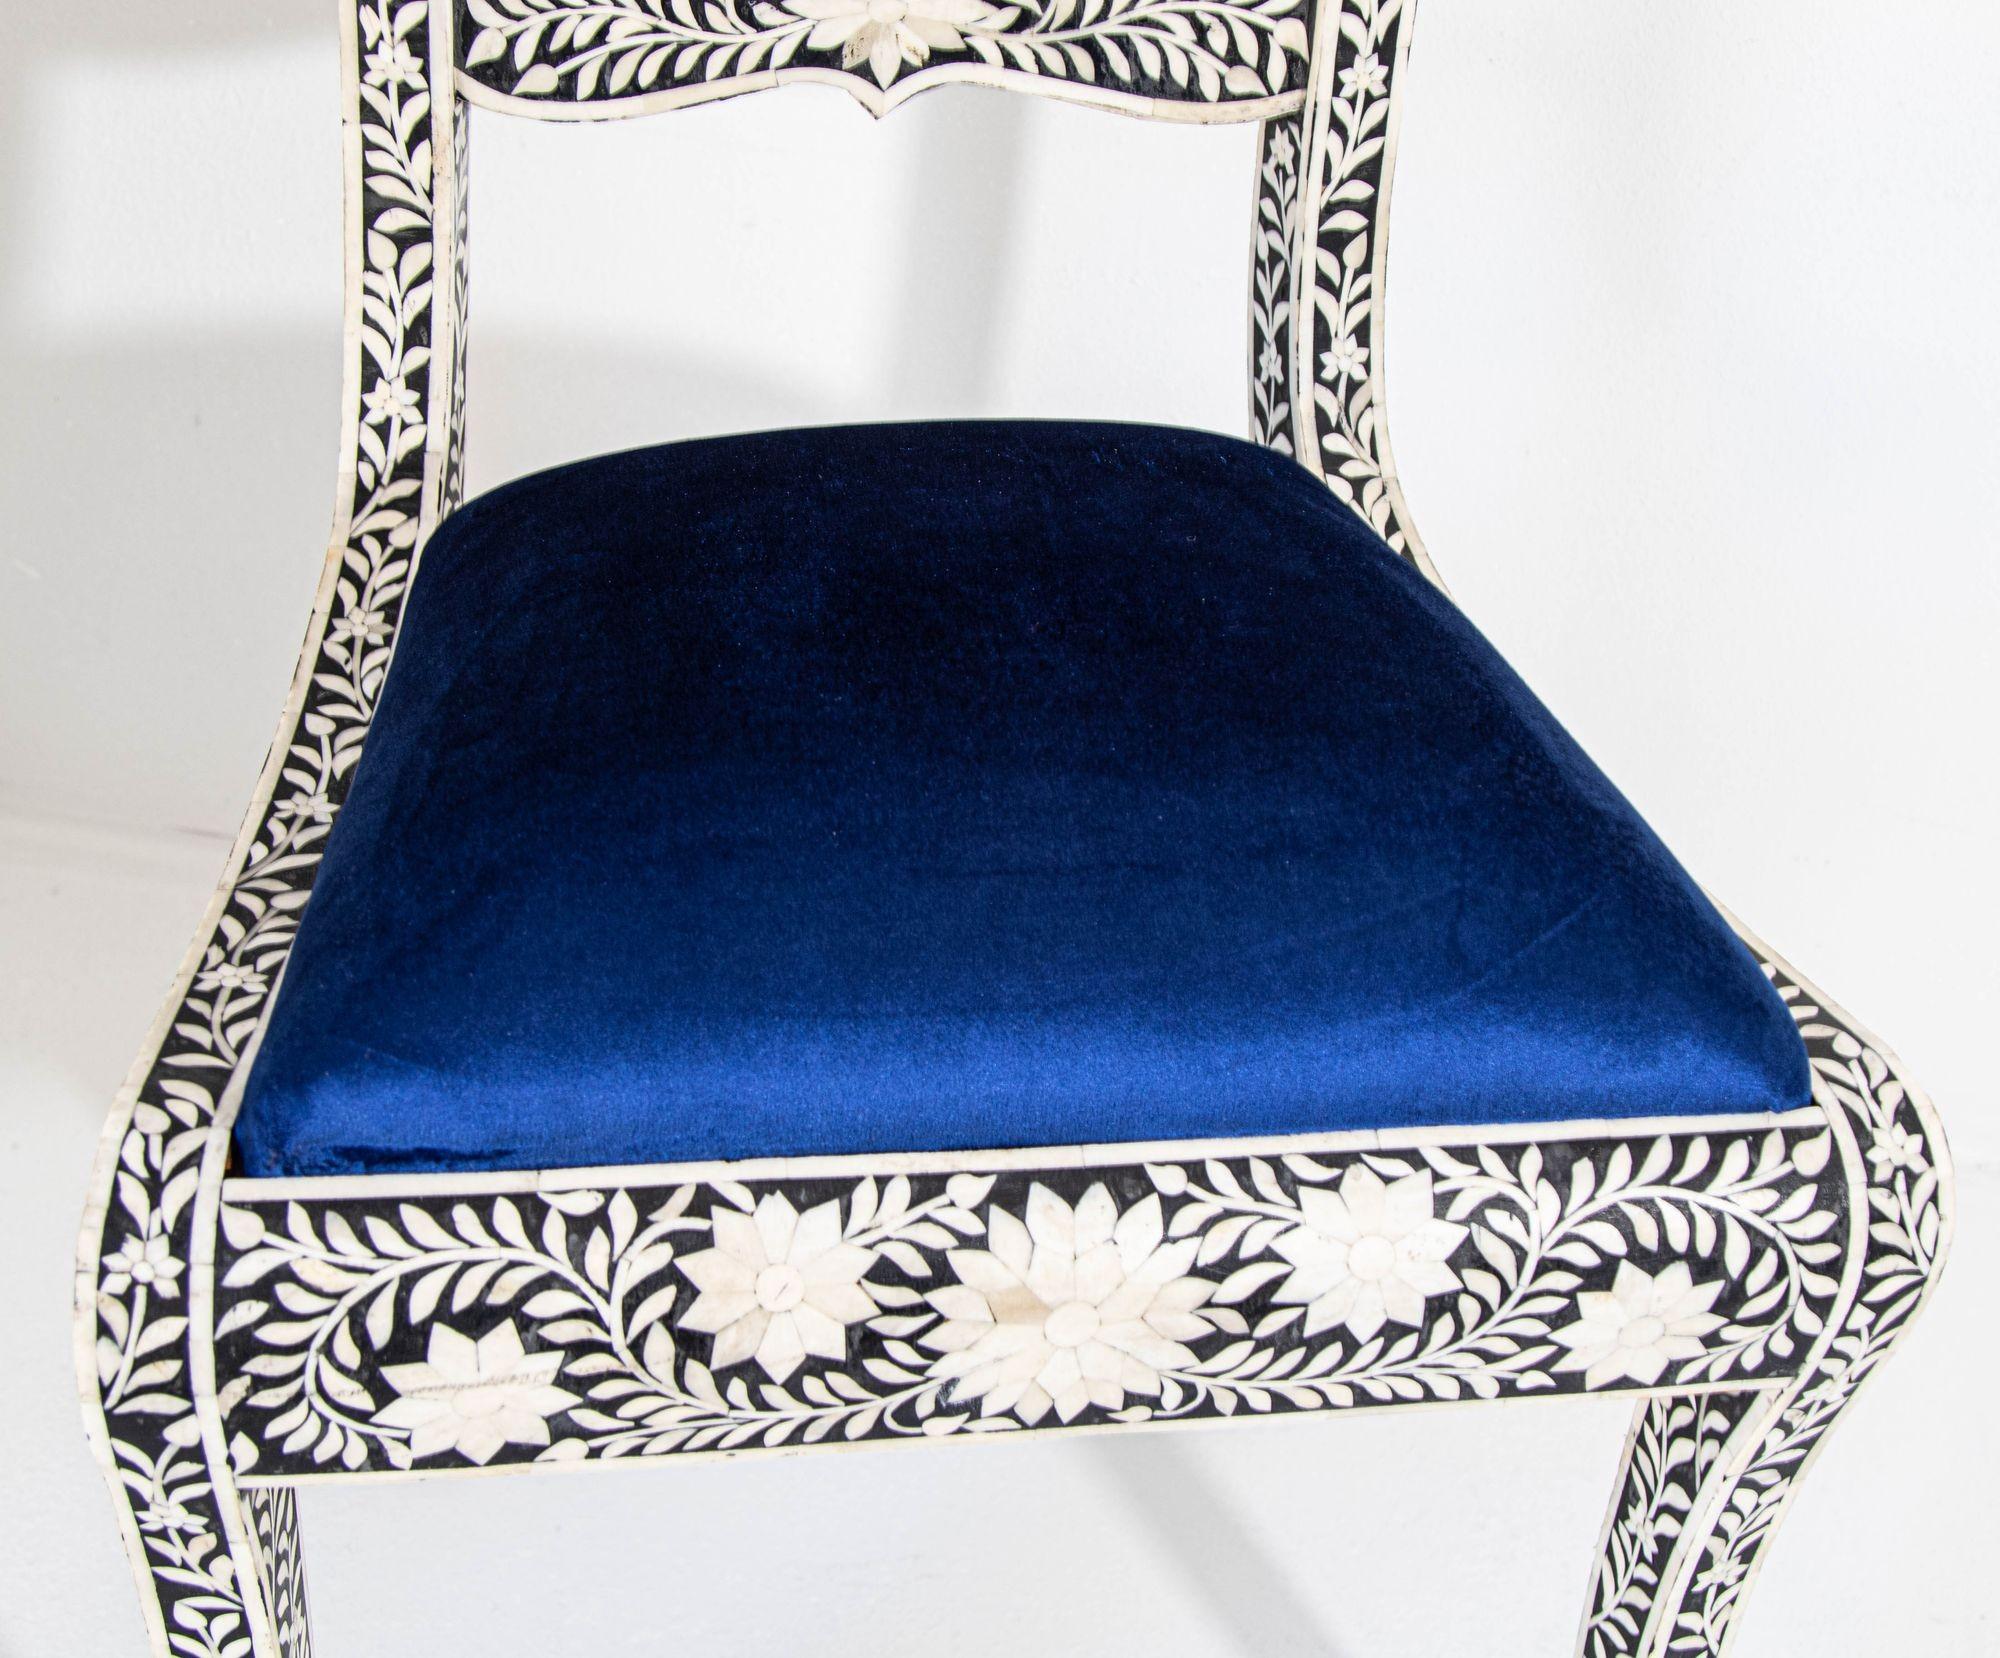 Antique Anglo-Indian Side Chair with Ram's Head Bone Inlaid Royal Blue Seat For Sale 4